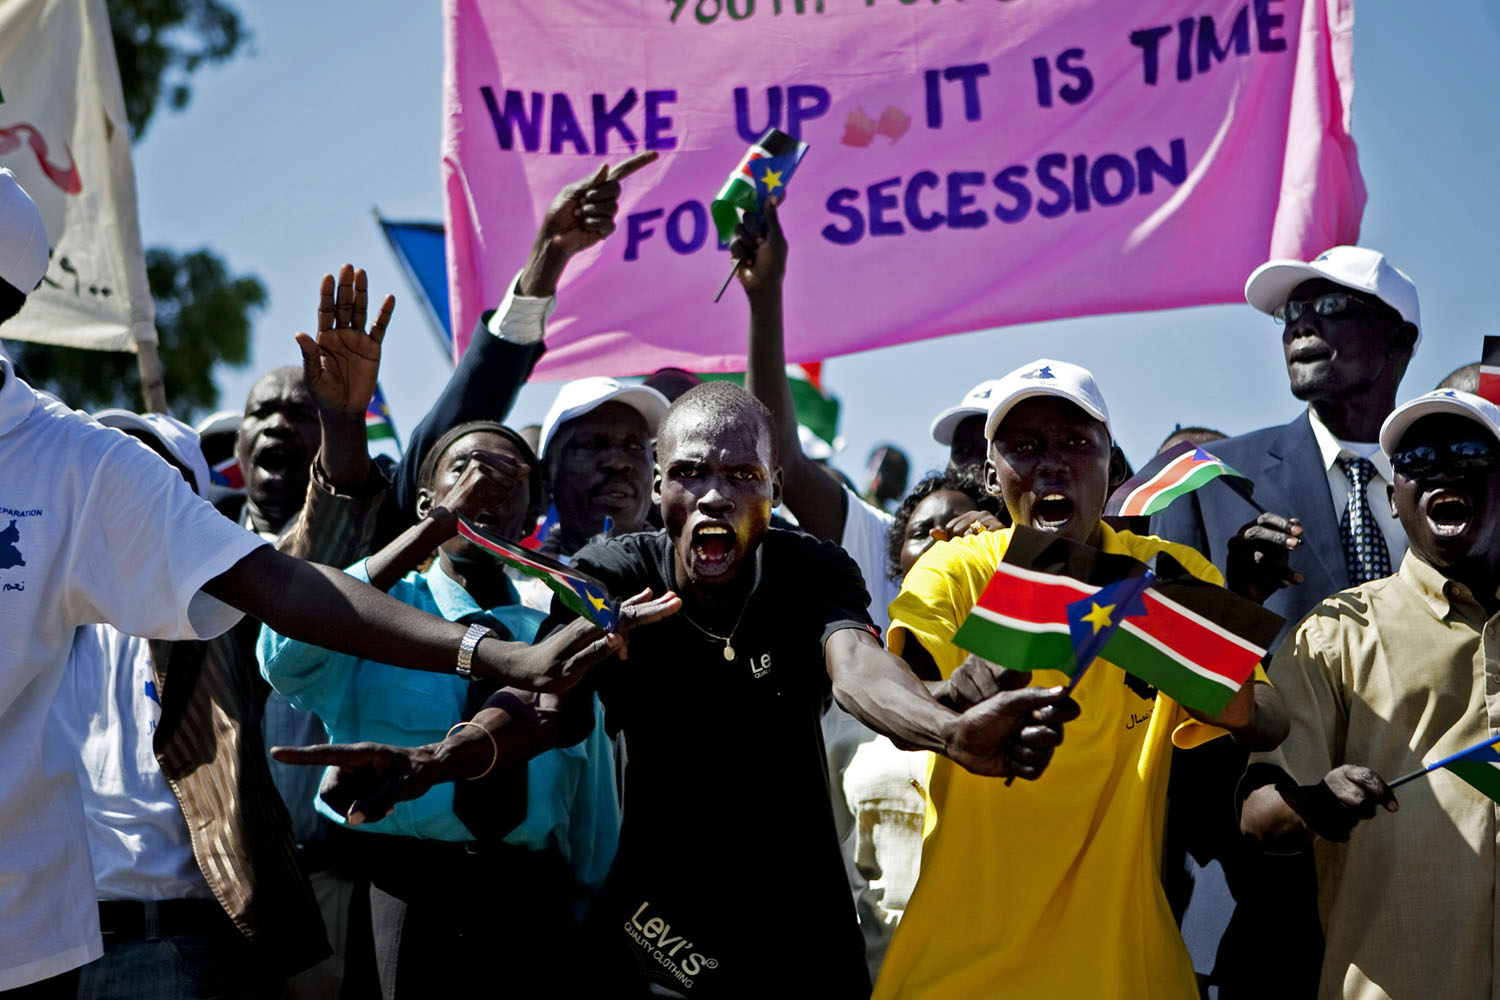 Southern Sudanese youth rally for secession in the capital city of Juba. Throughout 2010, youth movements campaigned heavily to bolster support for southern independence in the lead up to the January 2011 referendum.